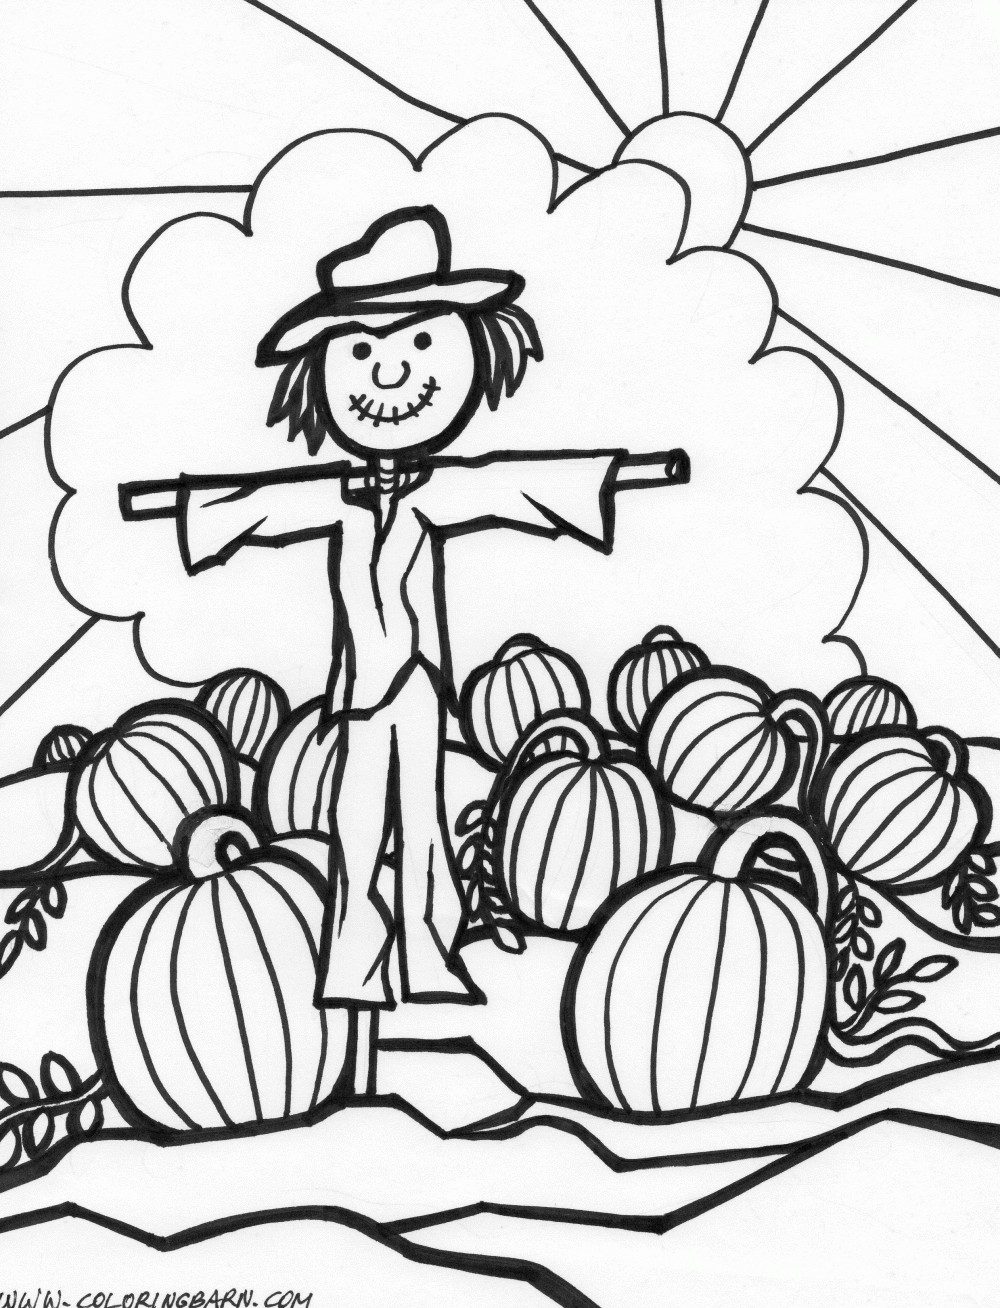 Pumpkin Coloring Pages For Toddlers
 transmissionpress Pumpkin Patch Coloring Page